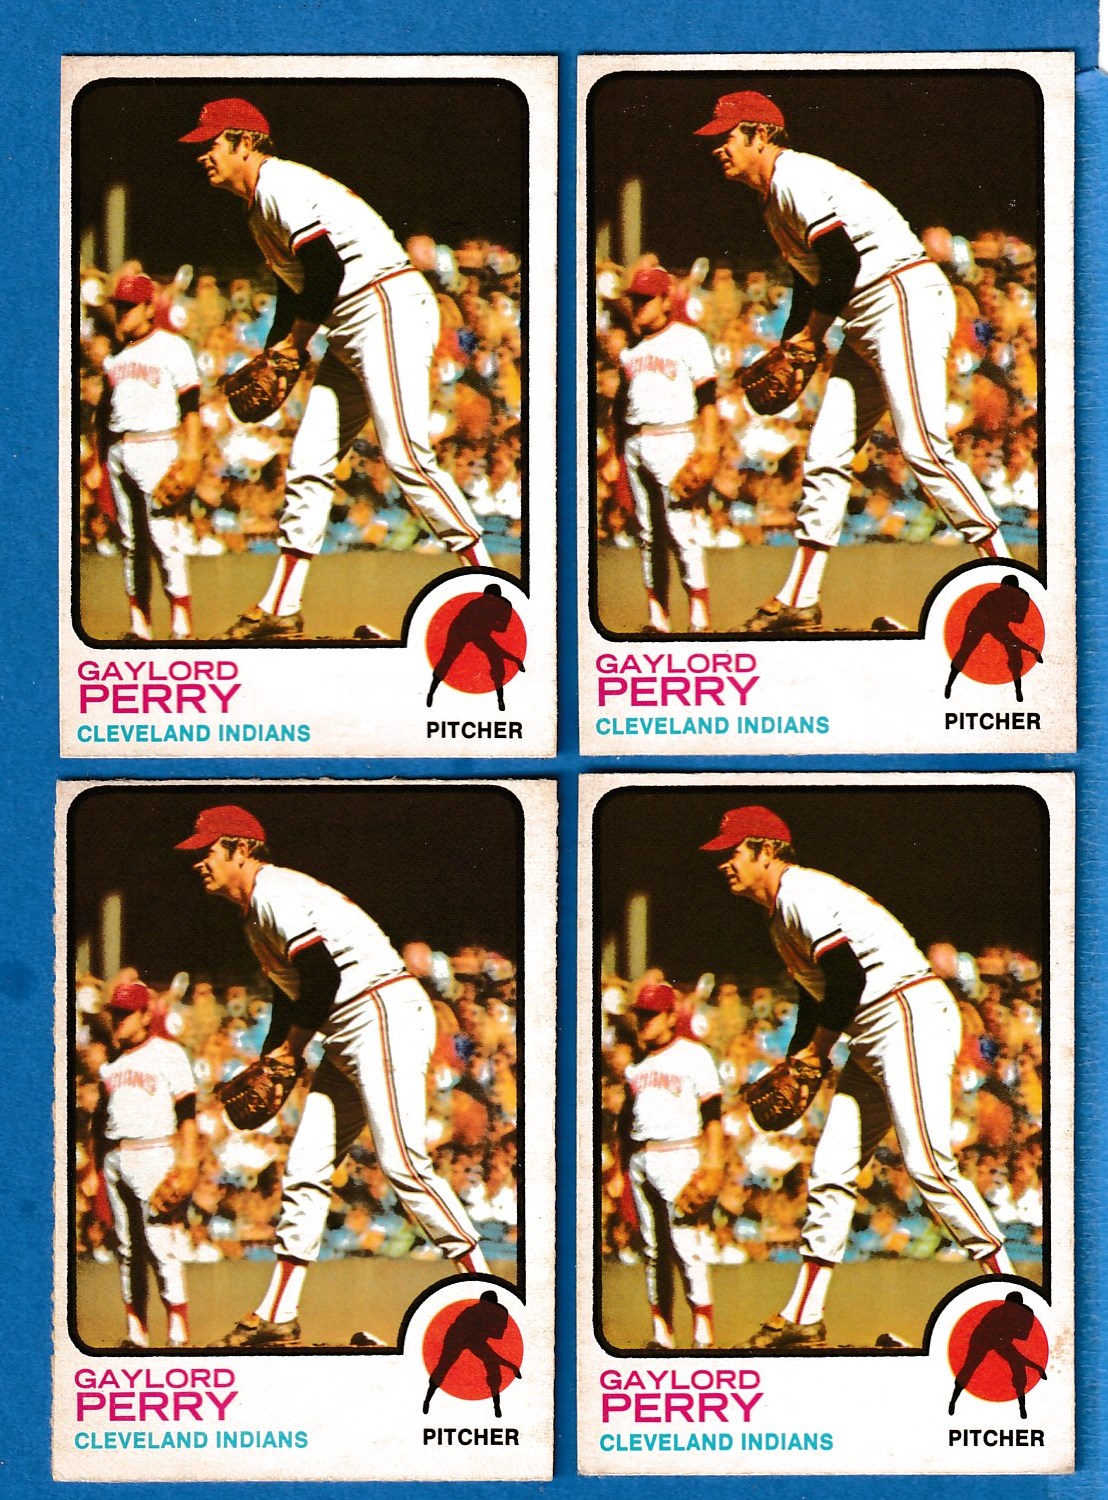 1973 O-Pee-Chee/OPC #400 Gaylord Perry (Indians) Baseball cards value